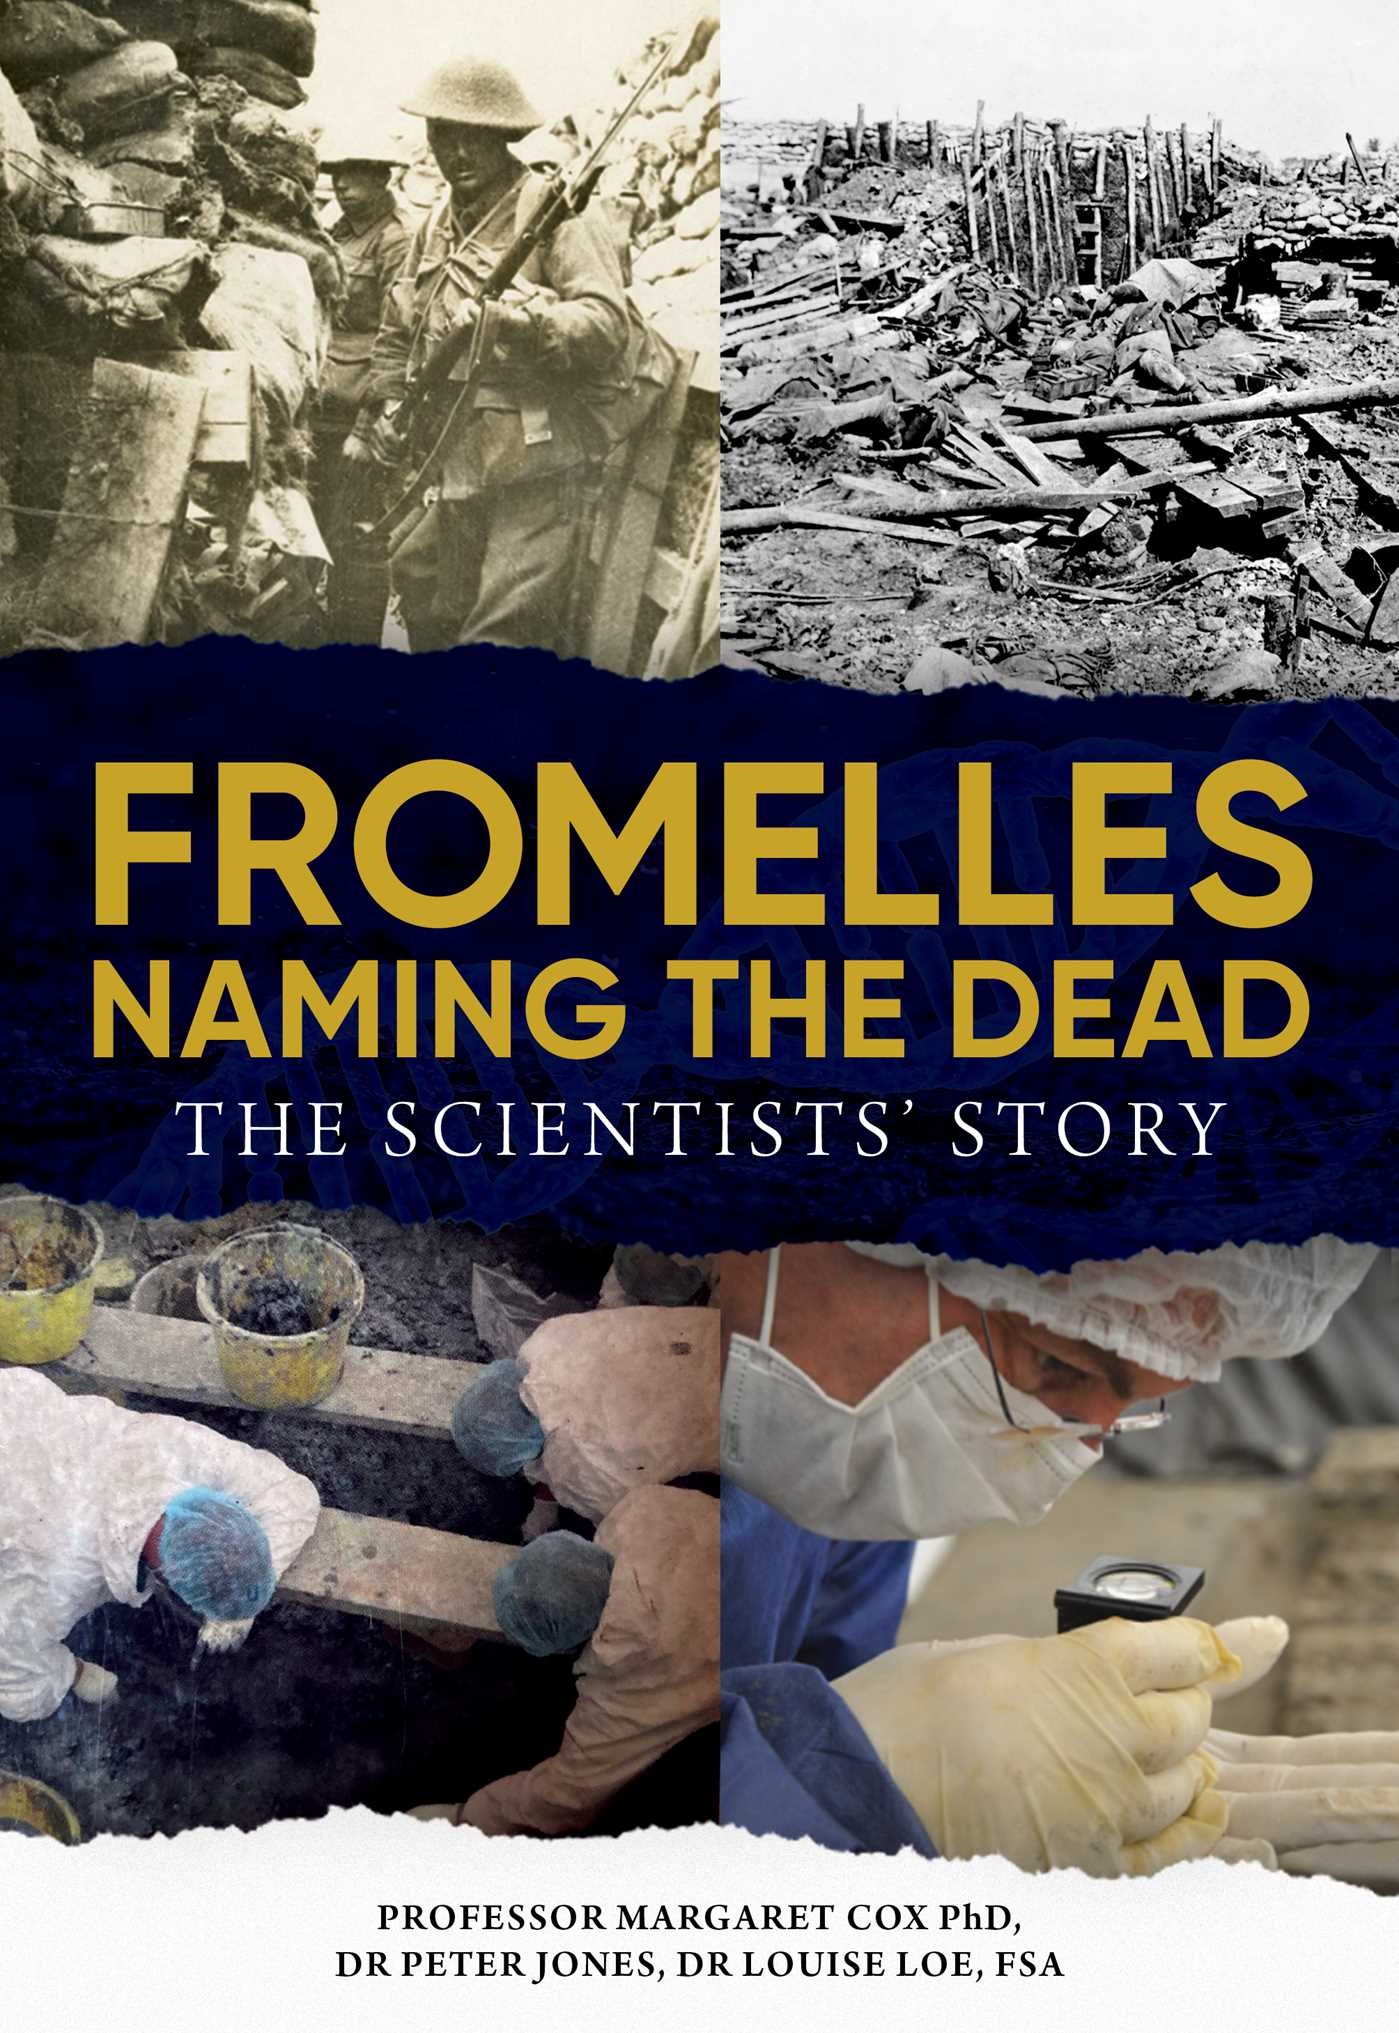 Fromelles: Naming the dead - the scientist's story